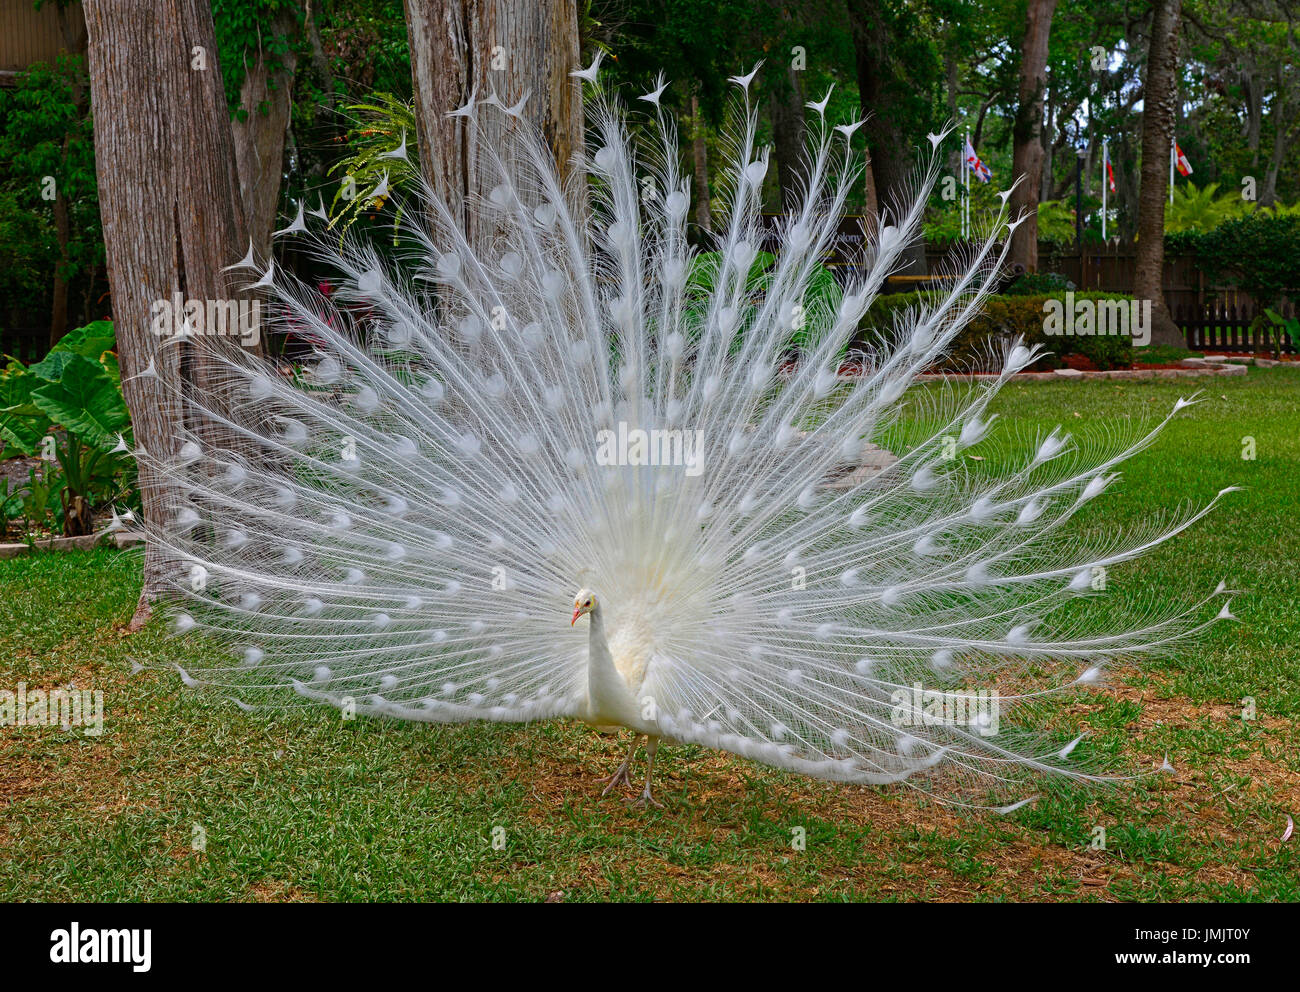 albino white Male peacock displaying showing colorful tail feathers Stock Photo